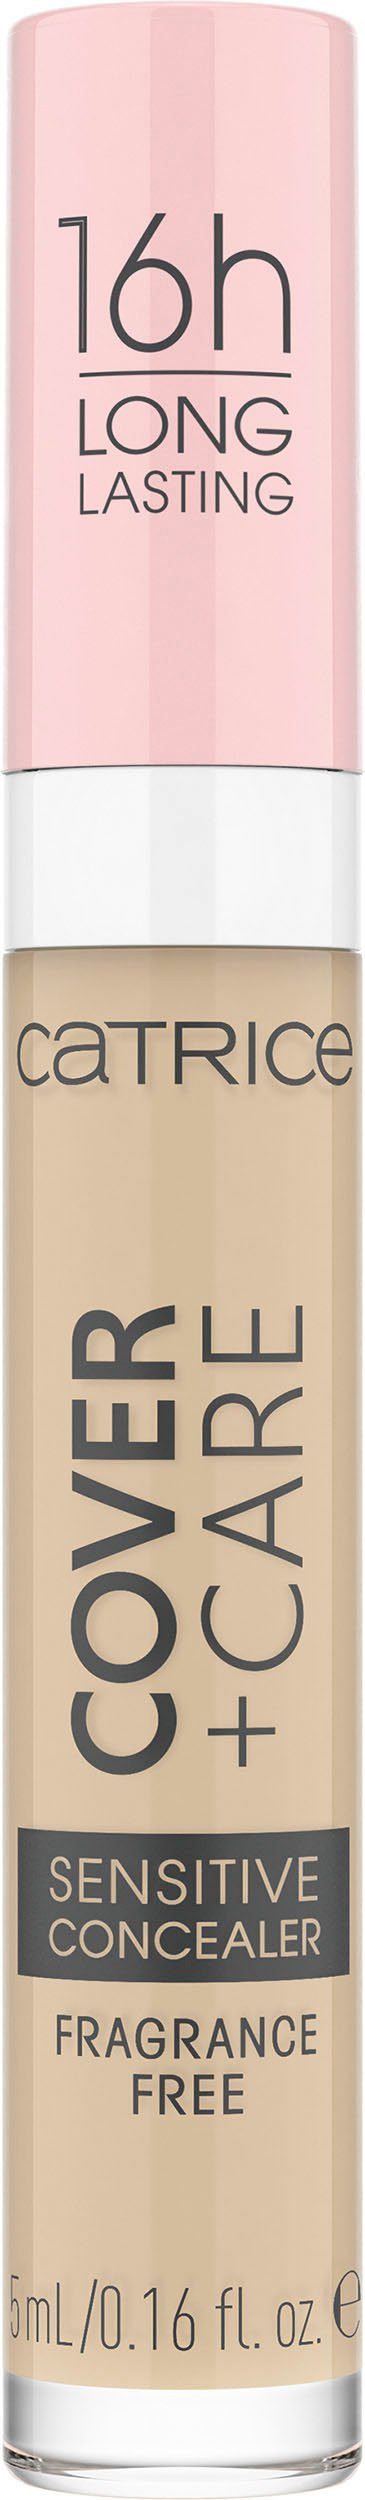 + nude Catrice Care Concealer, Concealer 3-tlg. Cover Catrice 002N Sensitive